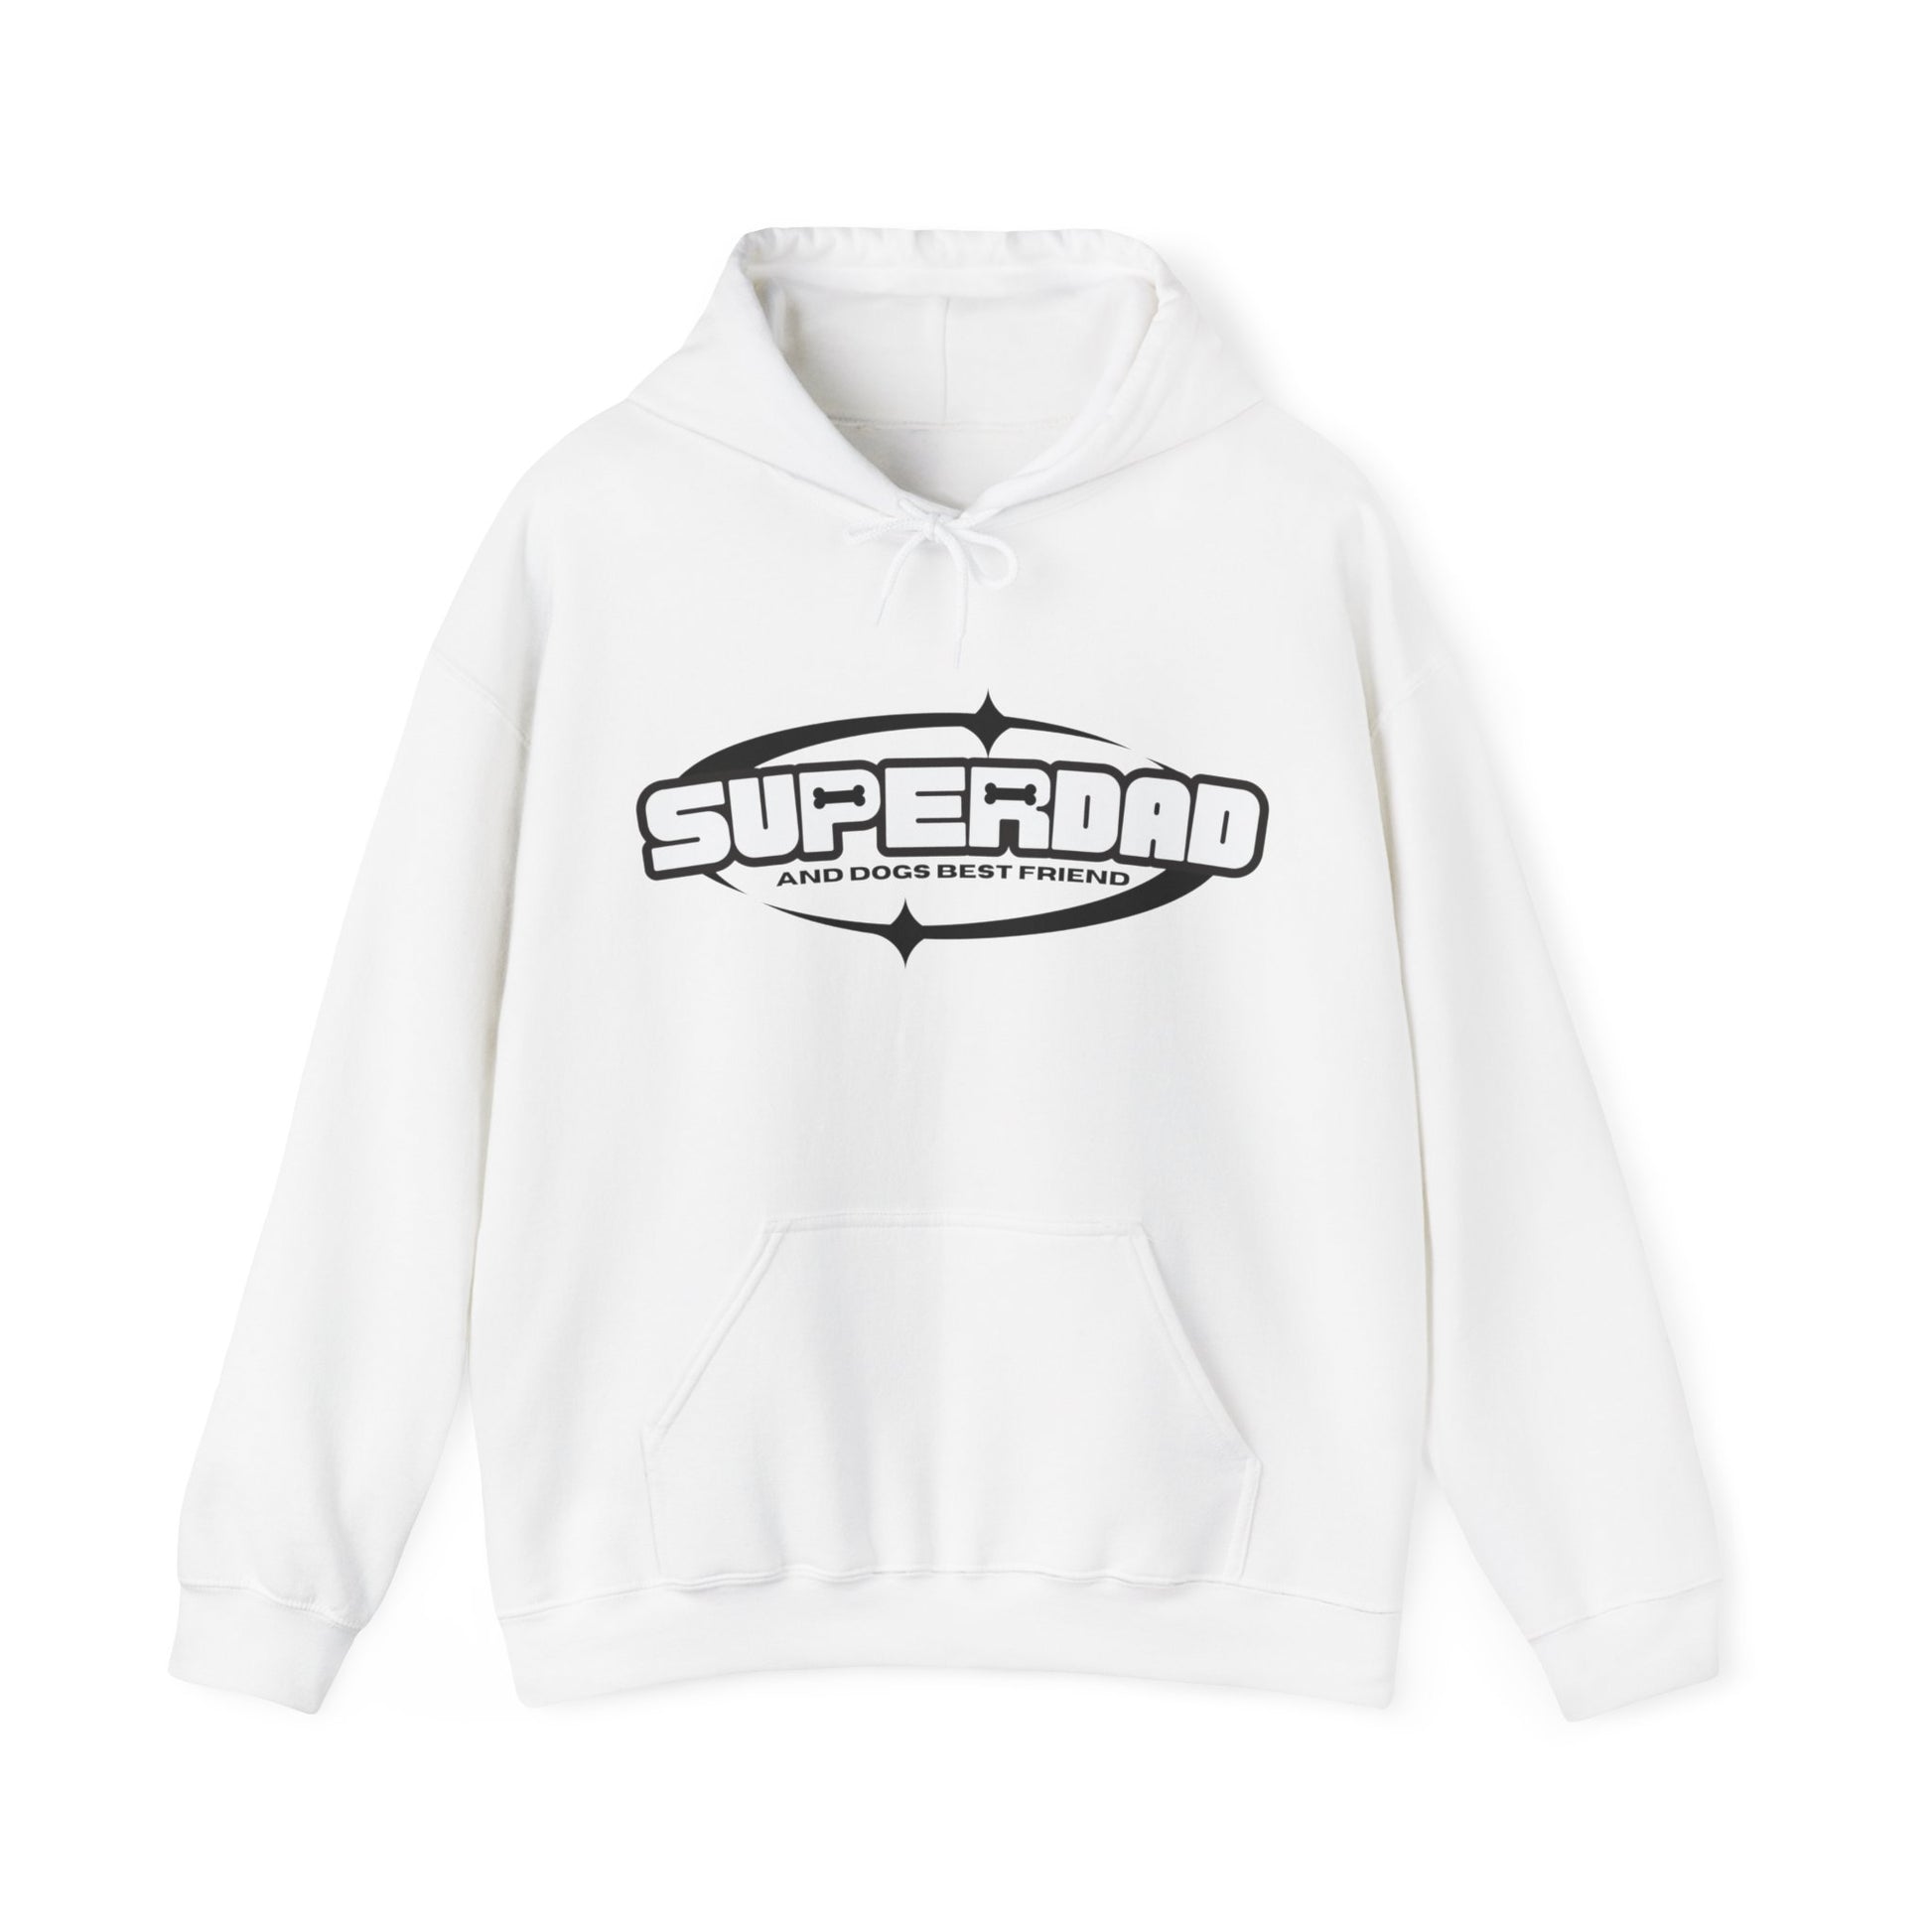 Resting against a clean white backdrop is a 'Superdad' unisex white sweatshirt by Dogs Pure Love.